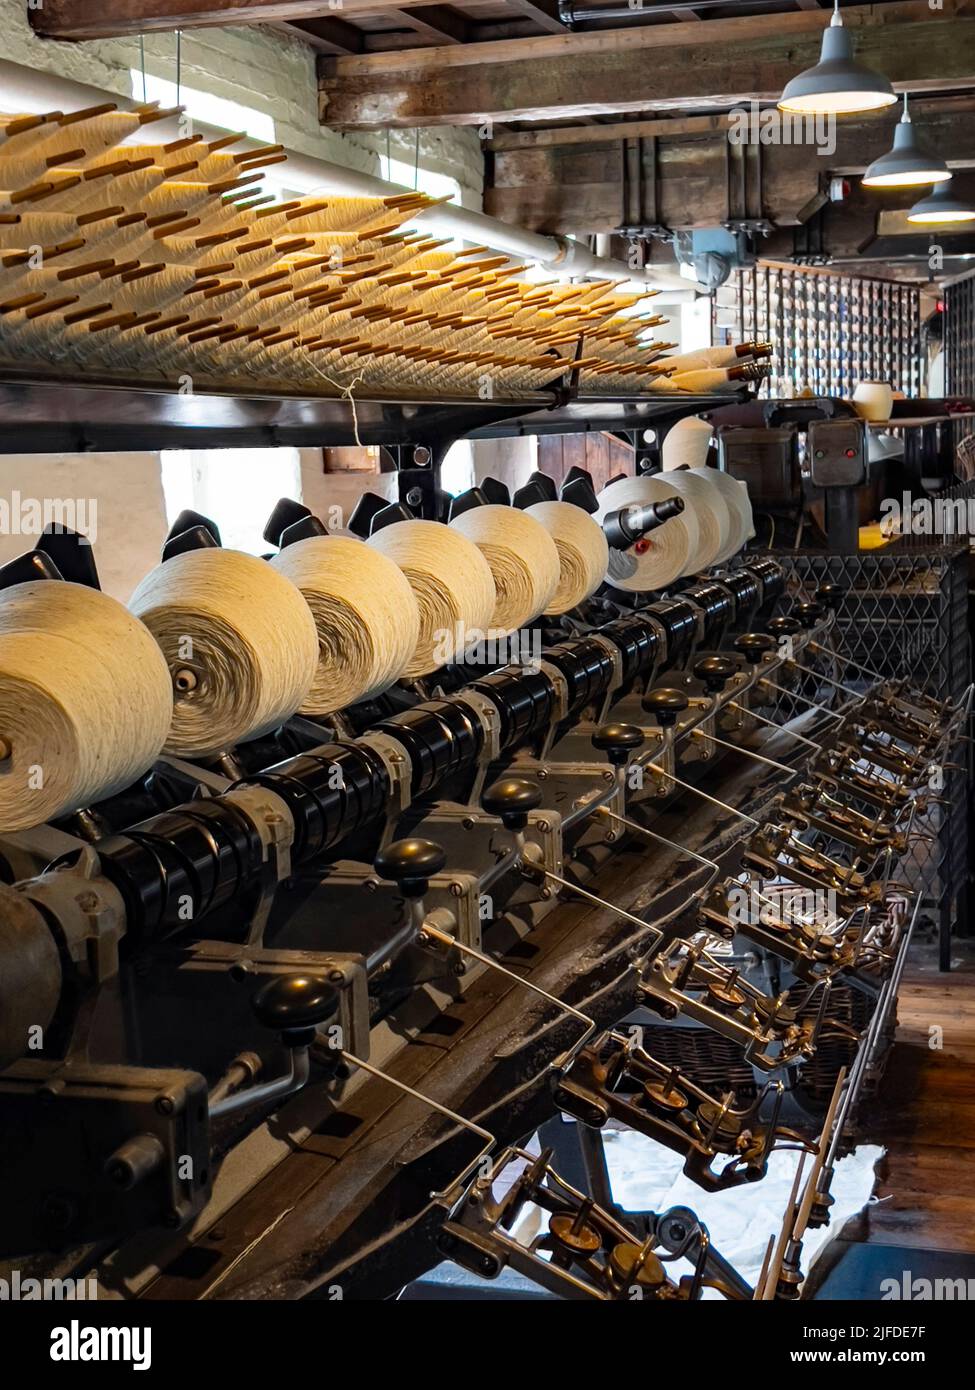 Quarry Bank Mill (also known as Styal Mill) in Styal, Cheshire, in northwest England. It is one of the best preserved textile factories of the Industr Stock Photo